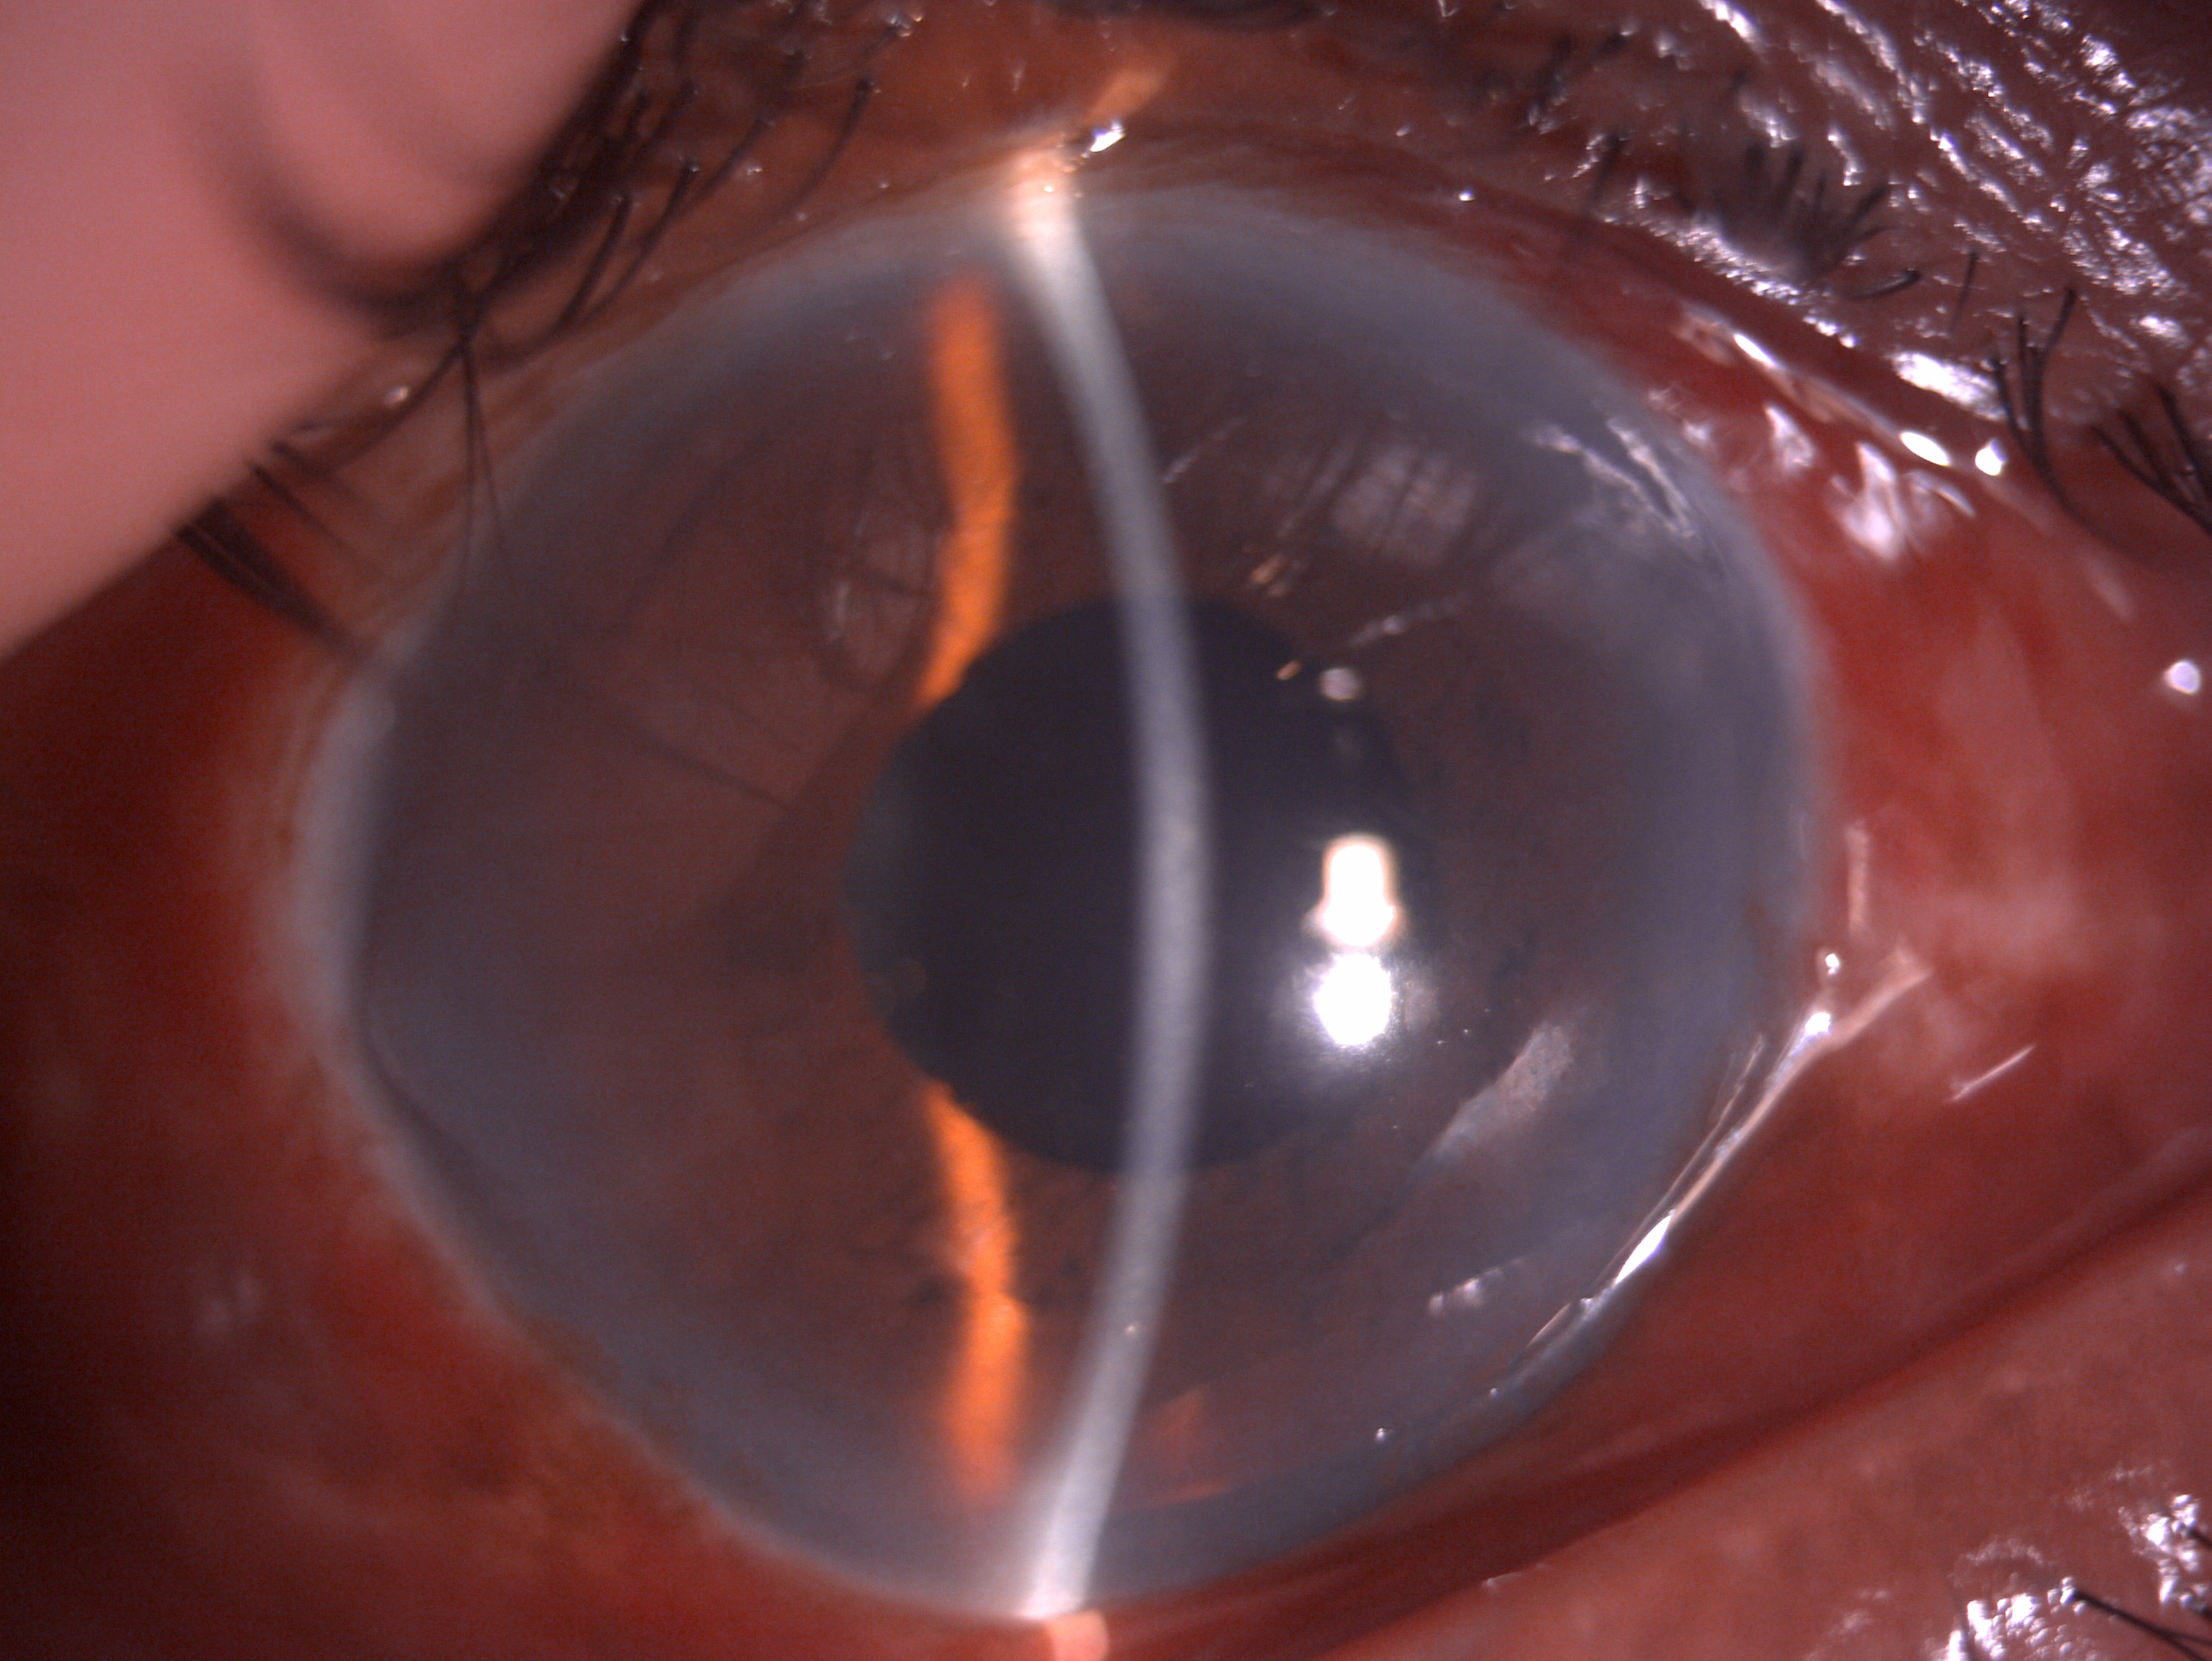 Postoperative slit lamp image of the patient after undergoing an uncomplicated phacoemulsification procedure